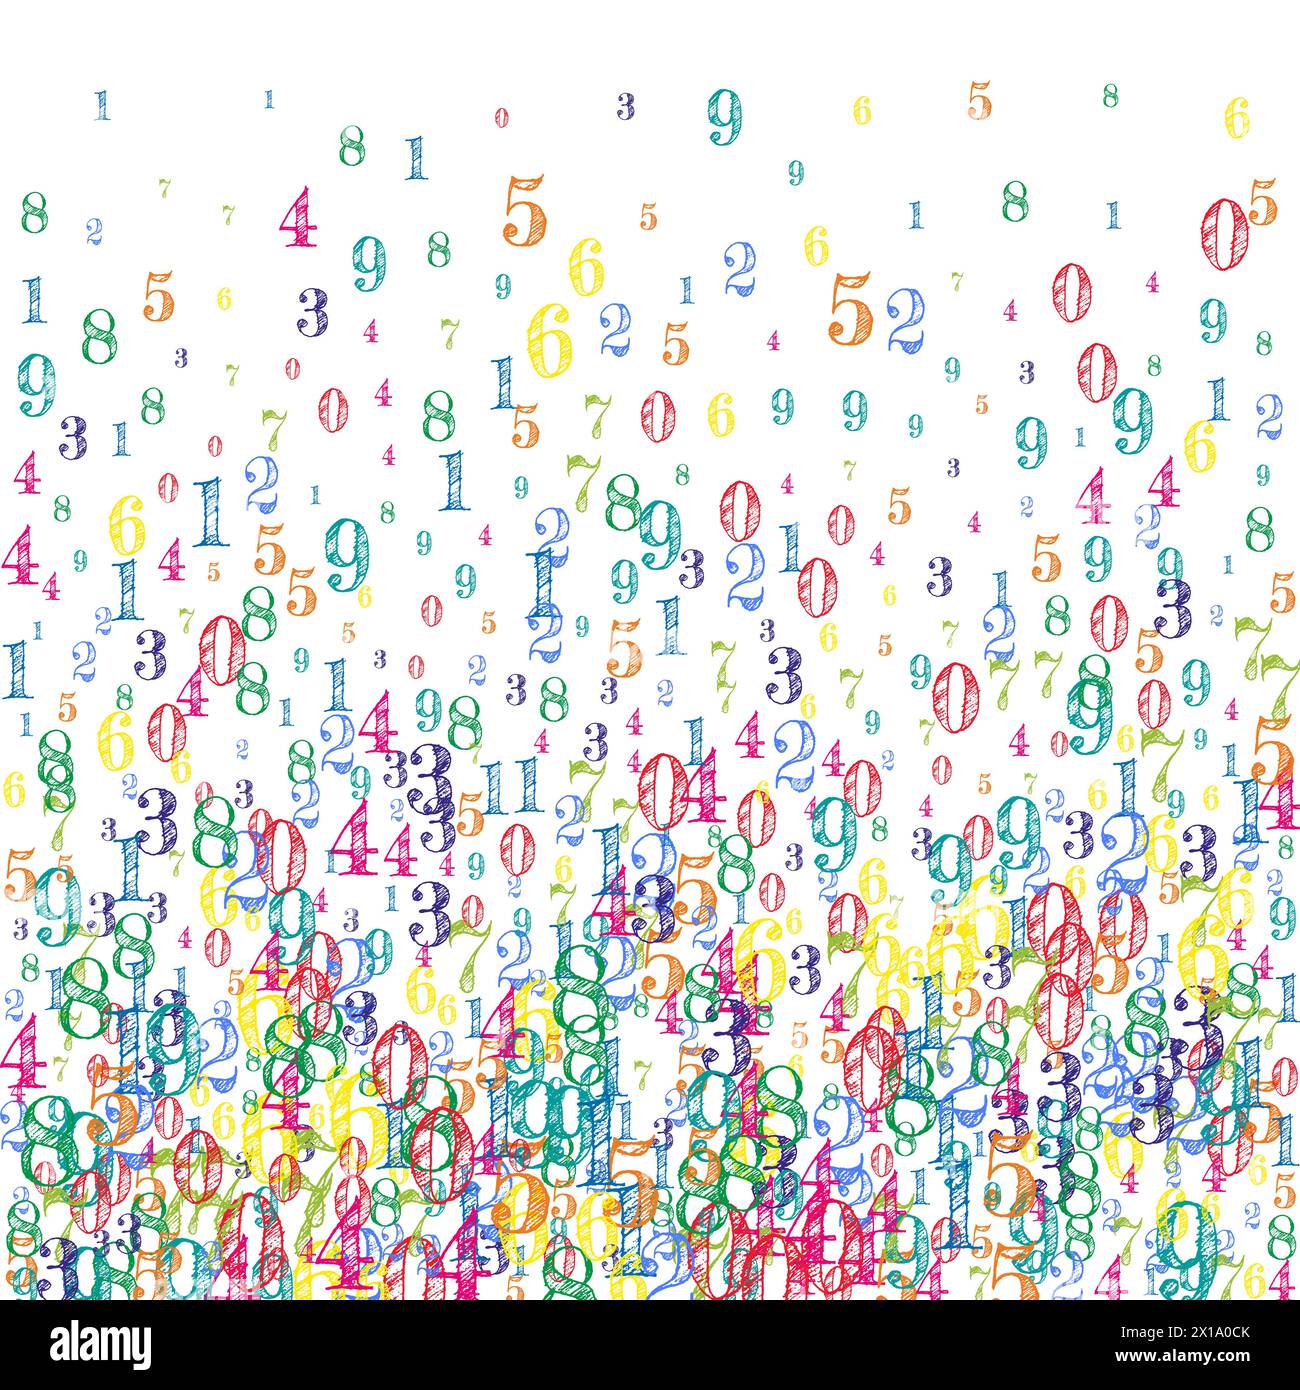 Scattered numbers. Colorful childish digits flying chaotic. Back to school mathematics banner on white background. Falling numbers vector illustration. Stock Vector